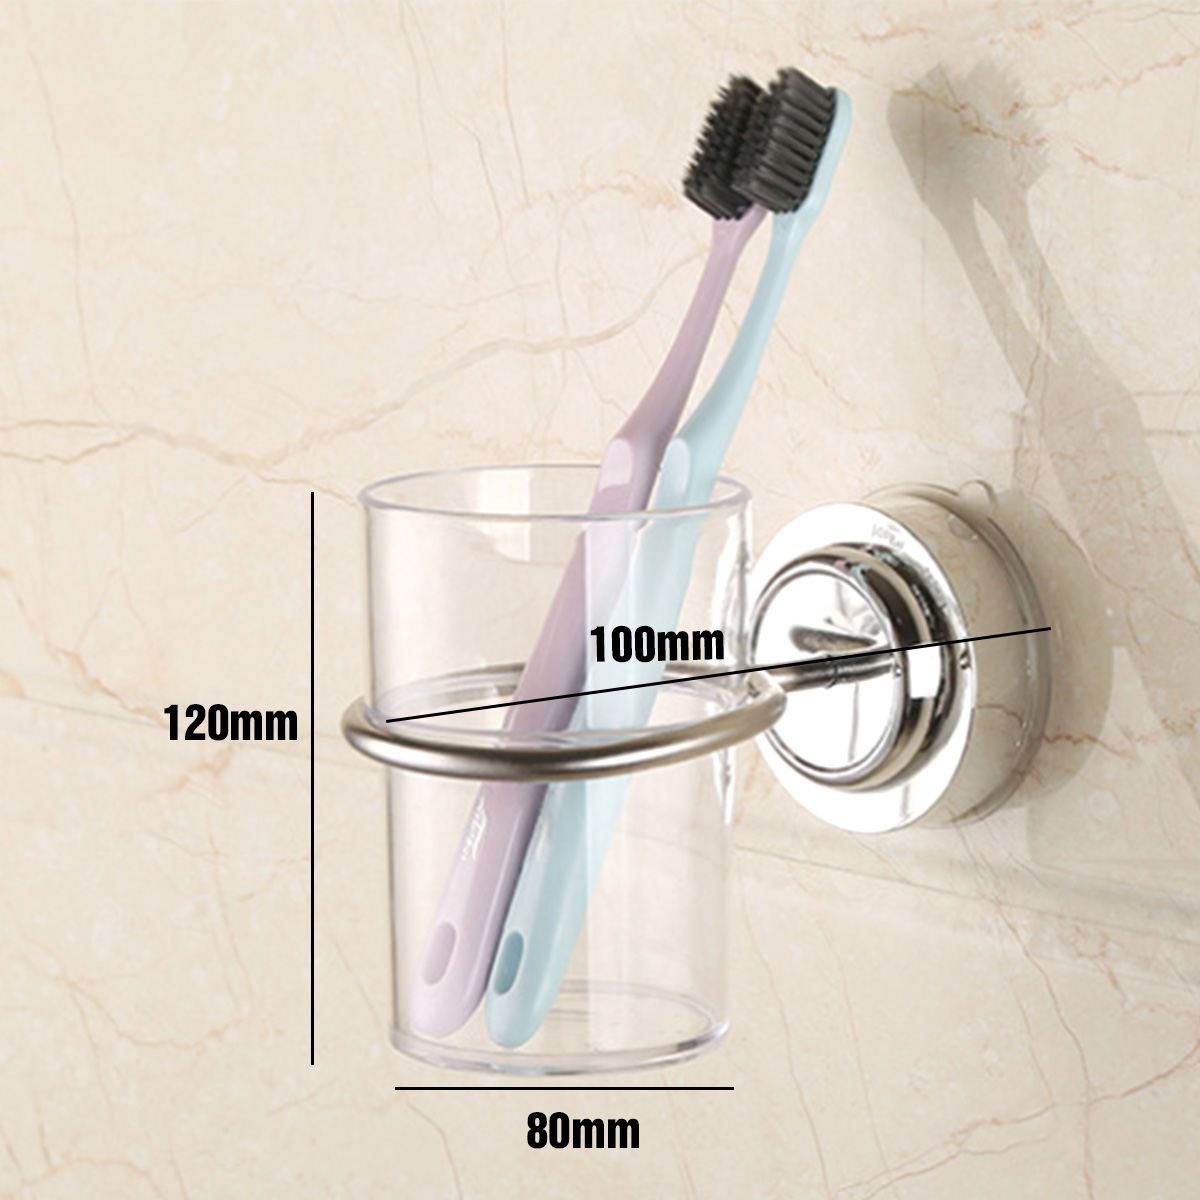 Bathroom-Suction-Wall-Mounted-Single-Stainless-Toothbrush-Tumbler-Holder-with-Cup-1758217-4